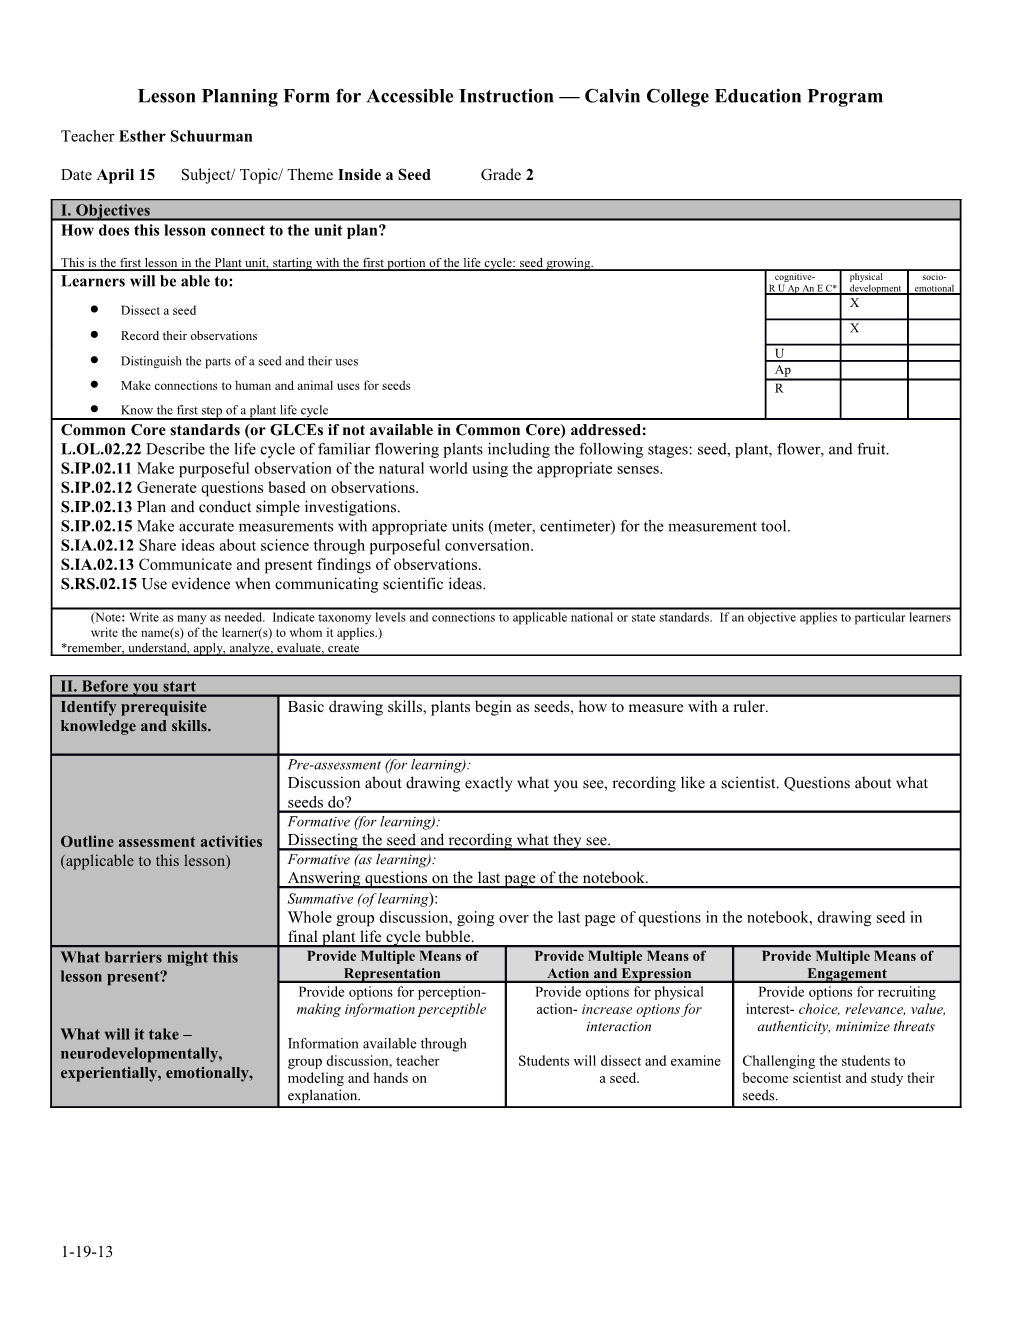 Lesson Planning Form for Accessible Instruction Calvin College Education Program